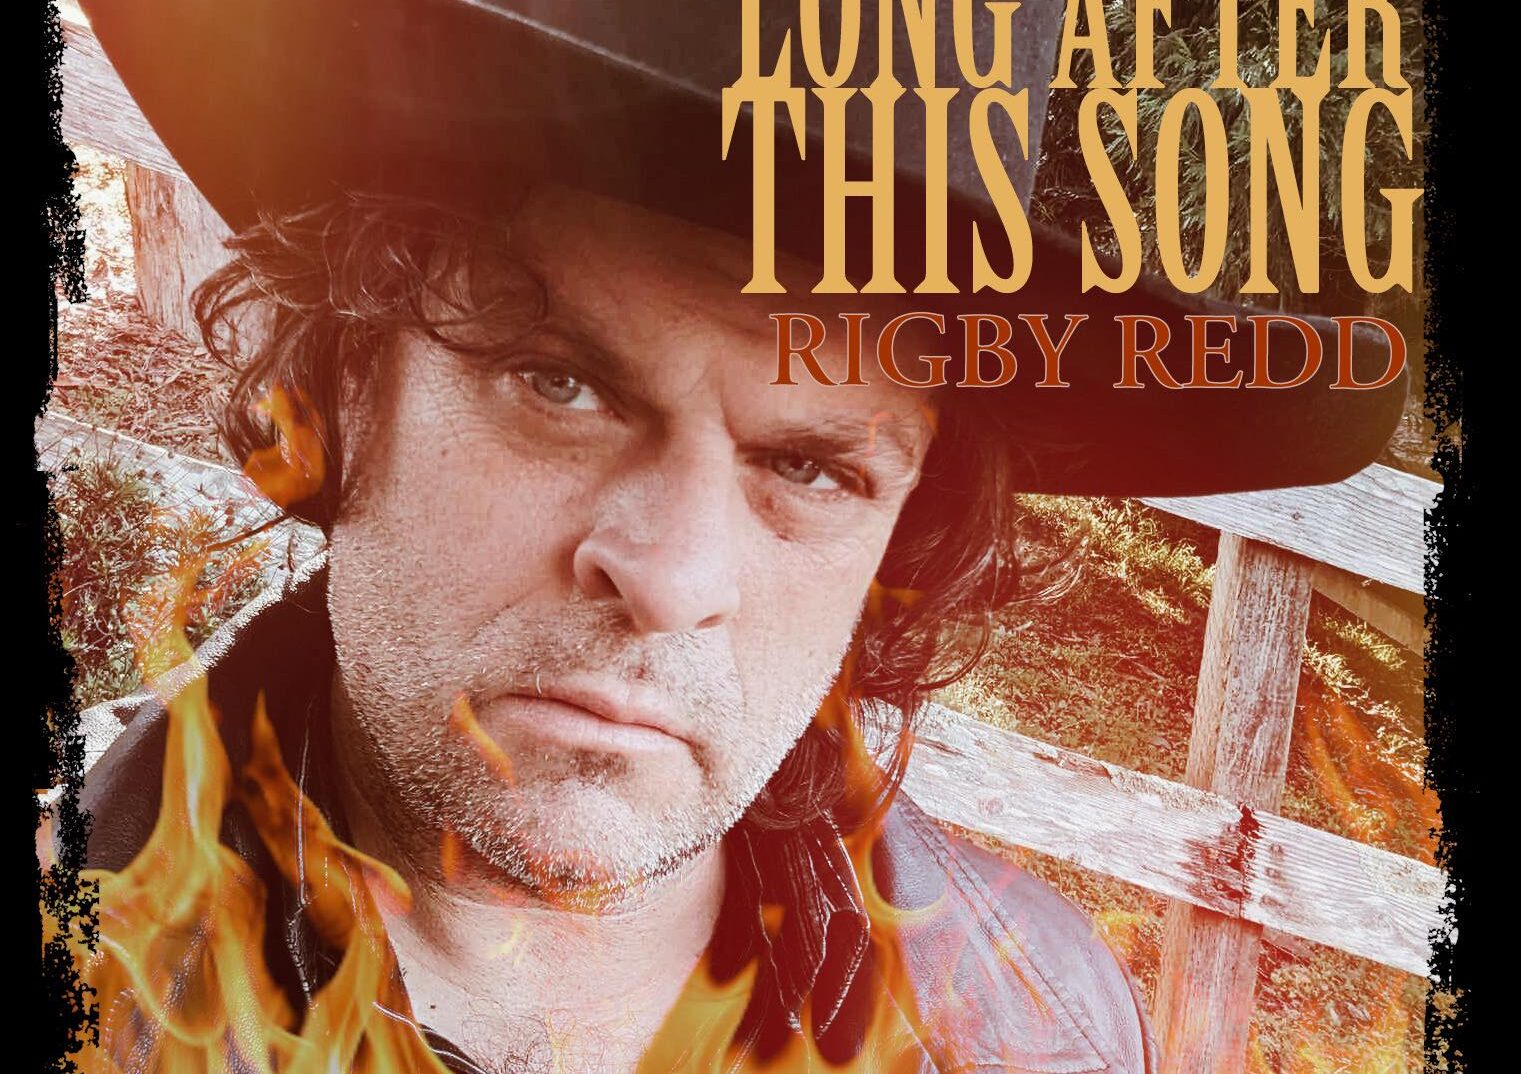 The Rich Country Sound of Rigby Redd